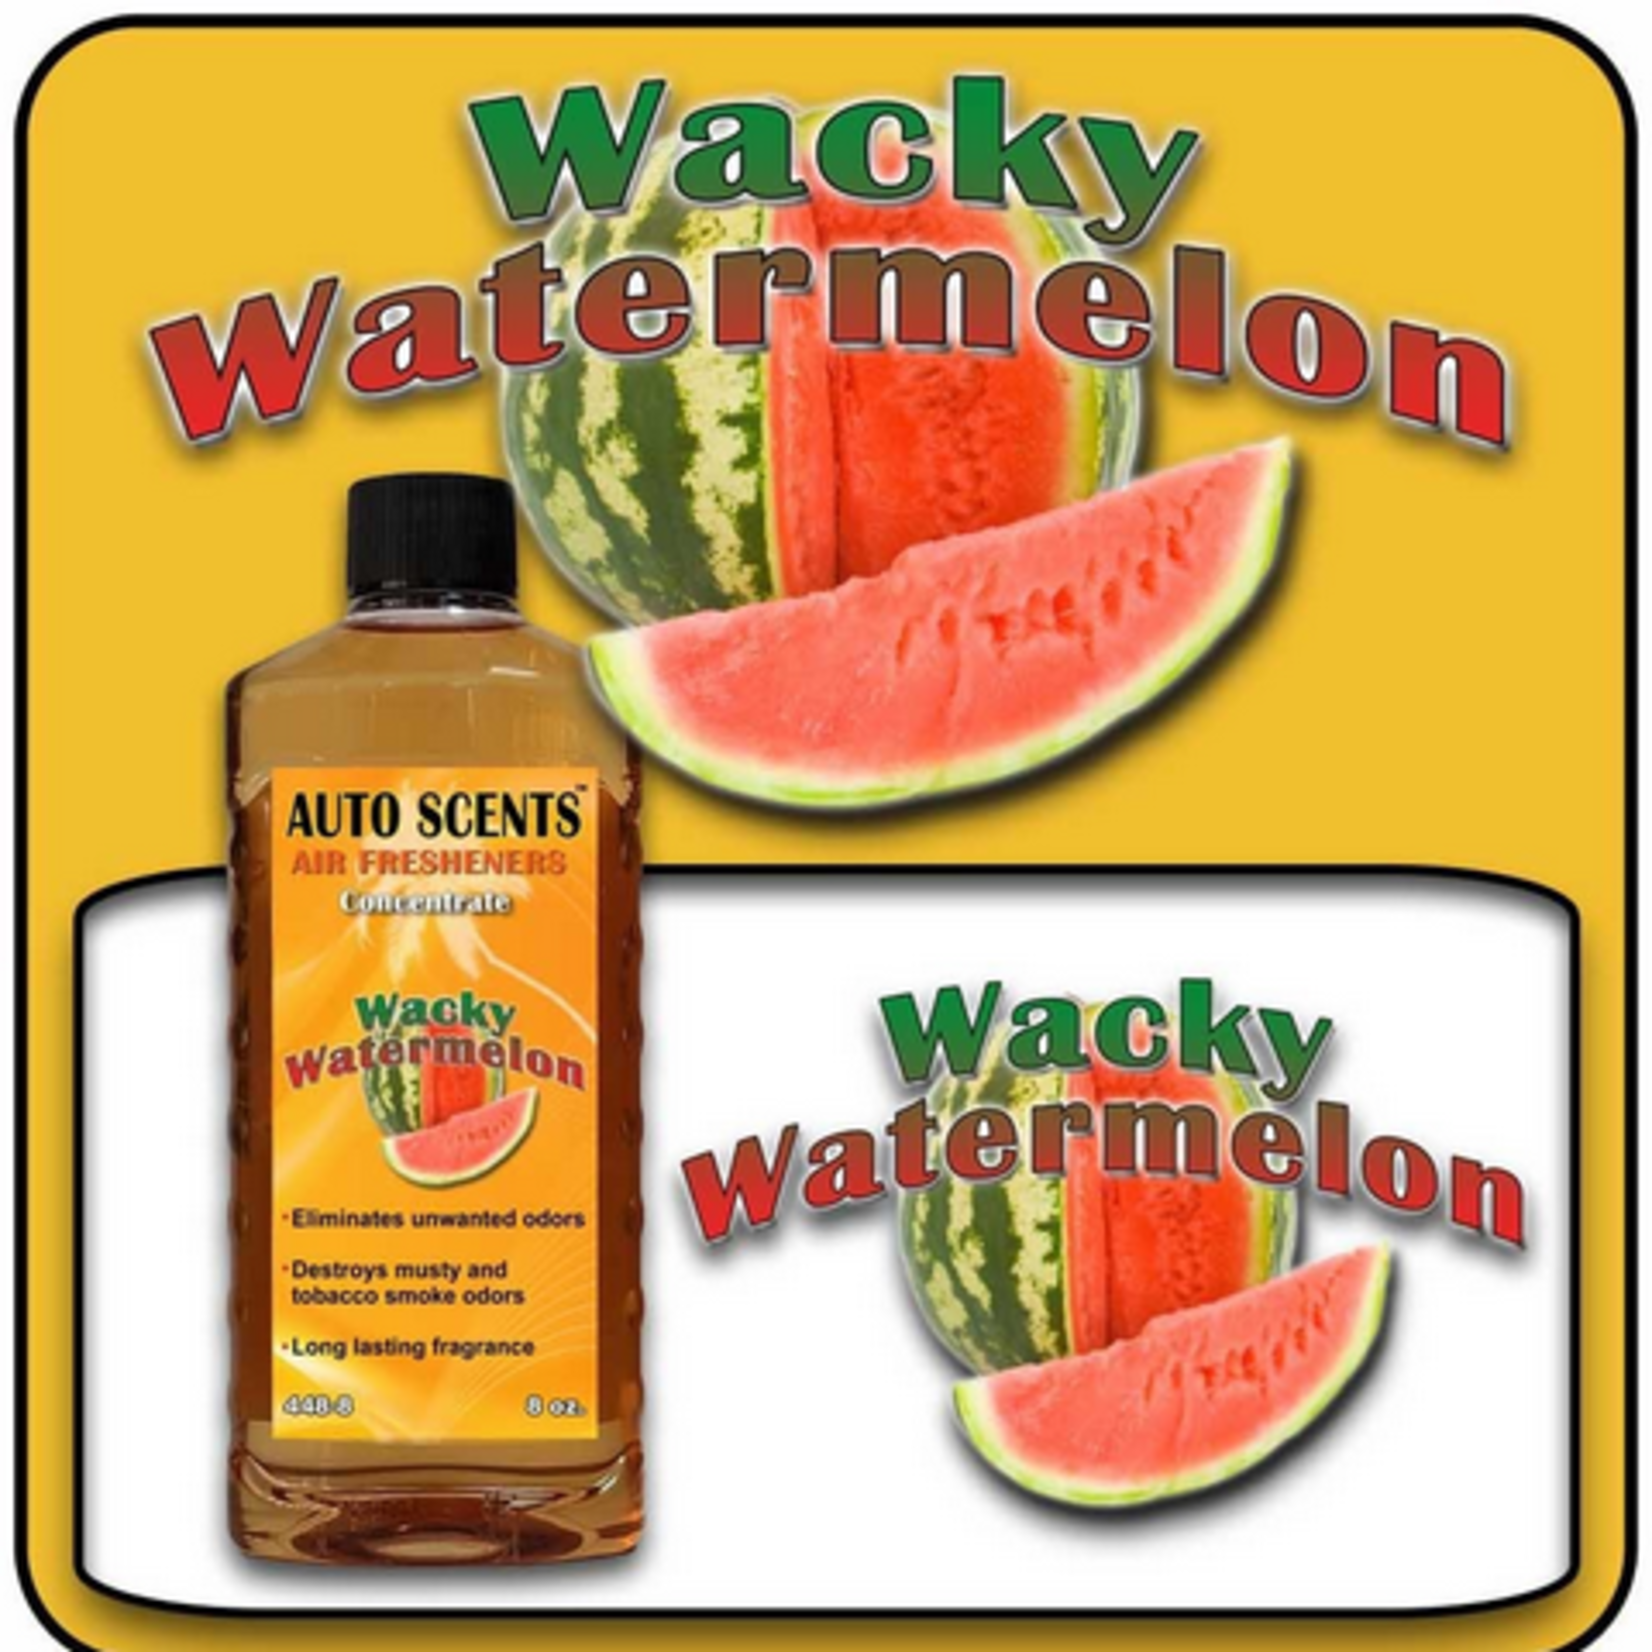 Auto Scents Auto Scents Air Fresheners - Wacky Watermelon 2X Concentrate